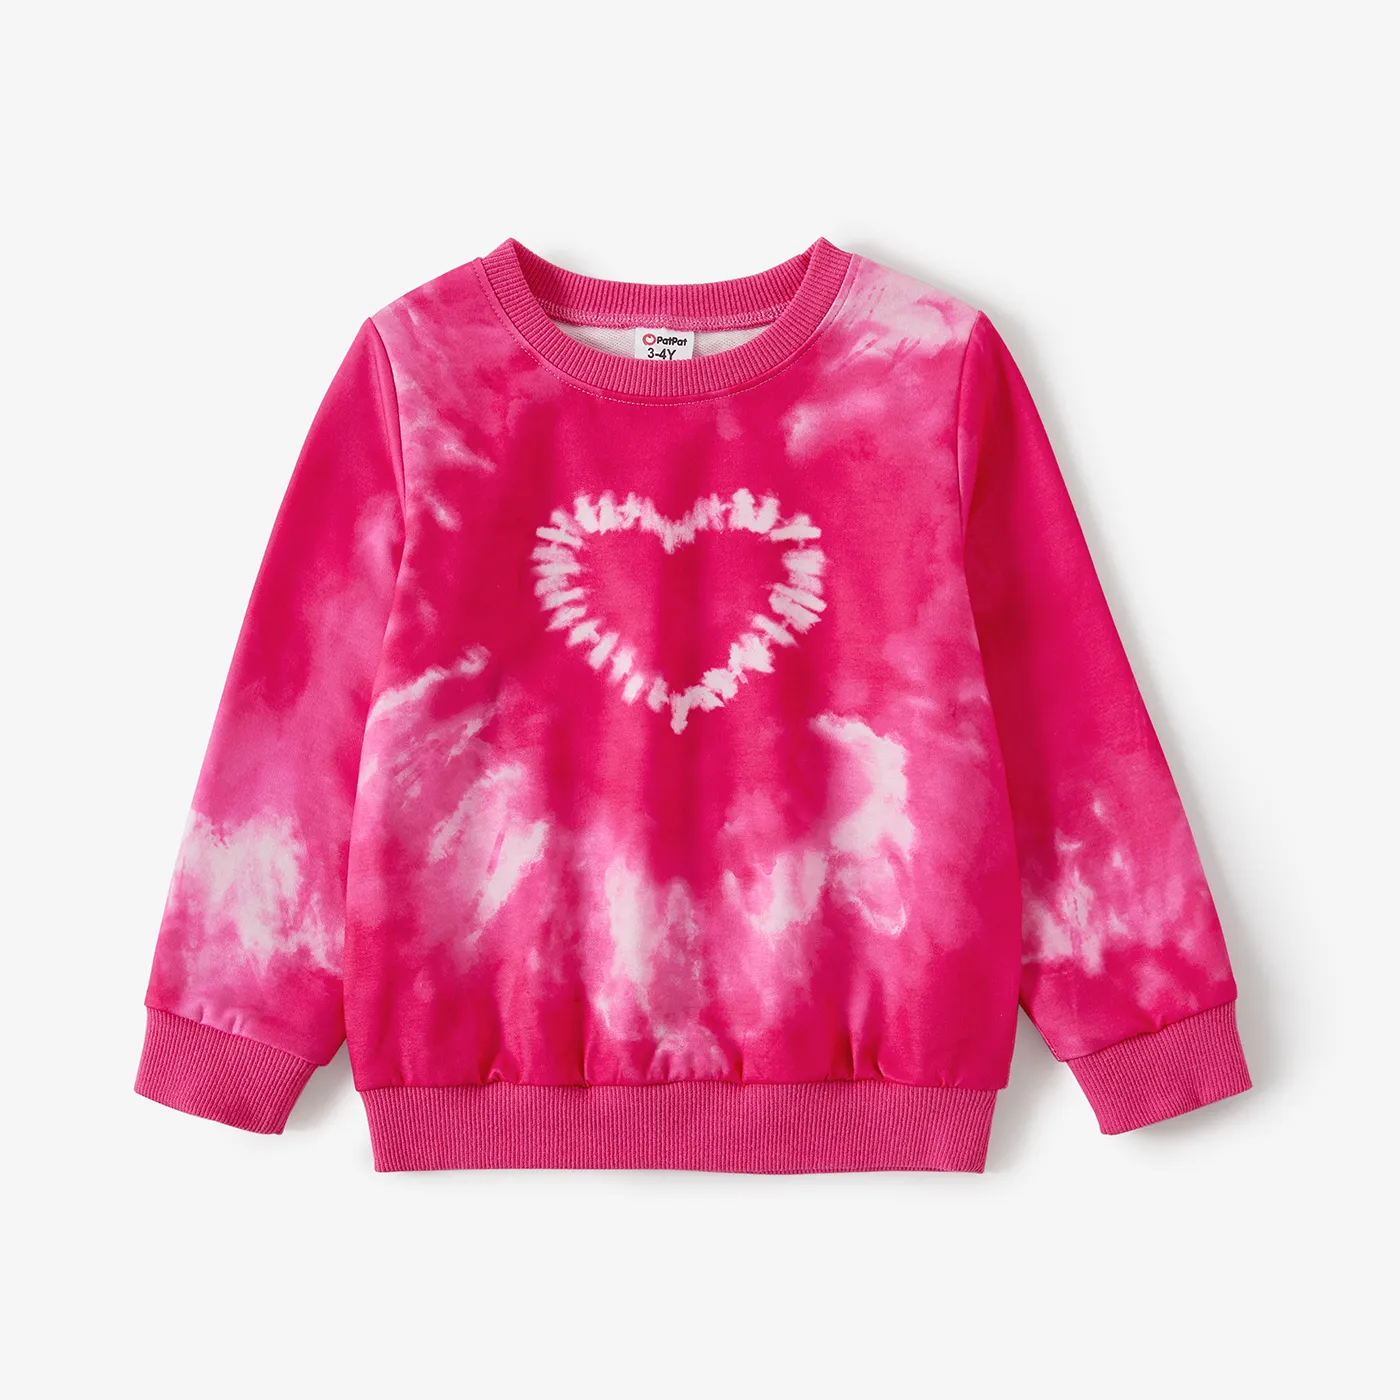 Mommy and Me Sweet Pink Tie-dye Heart Print Long-sleeve Tops